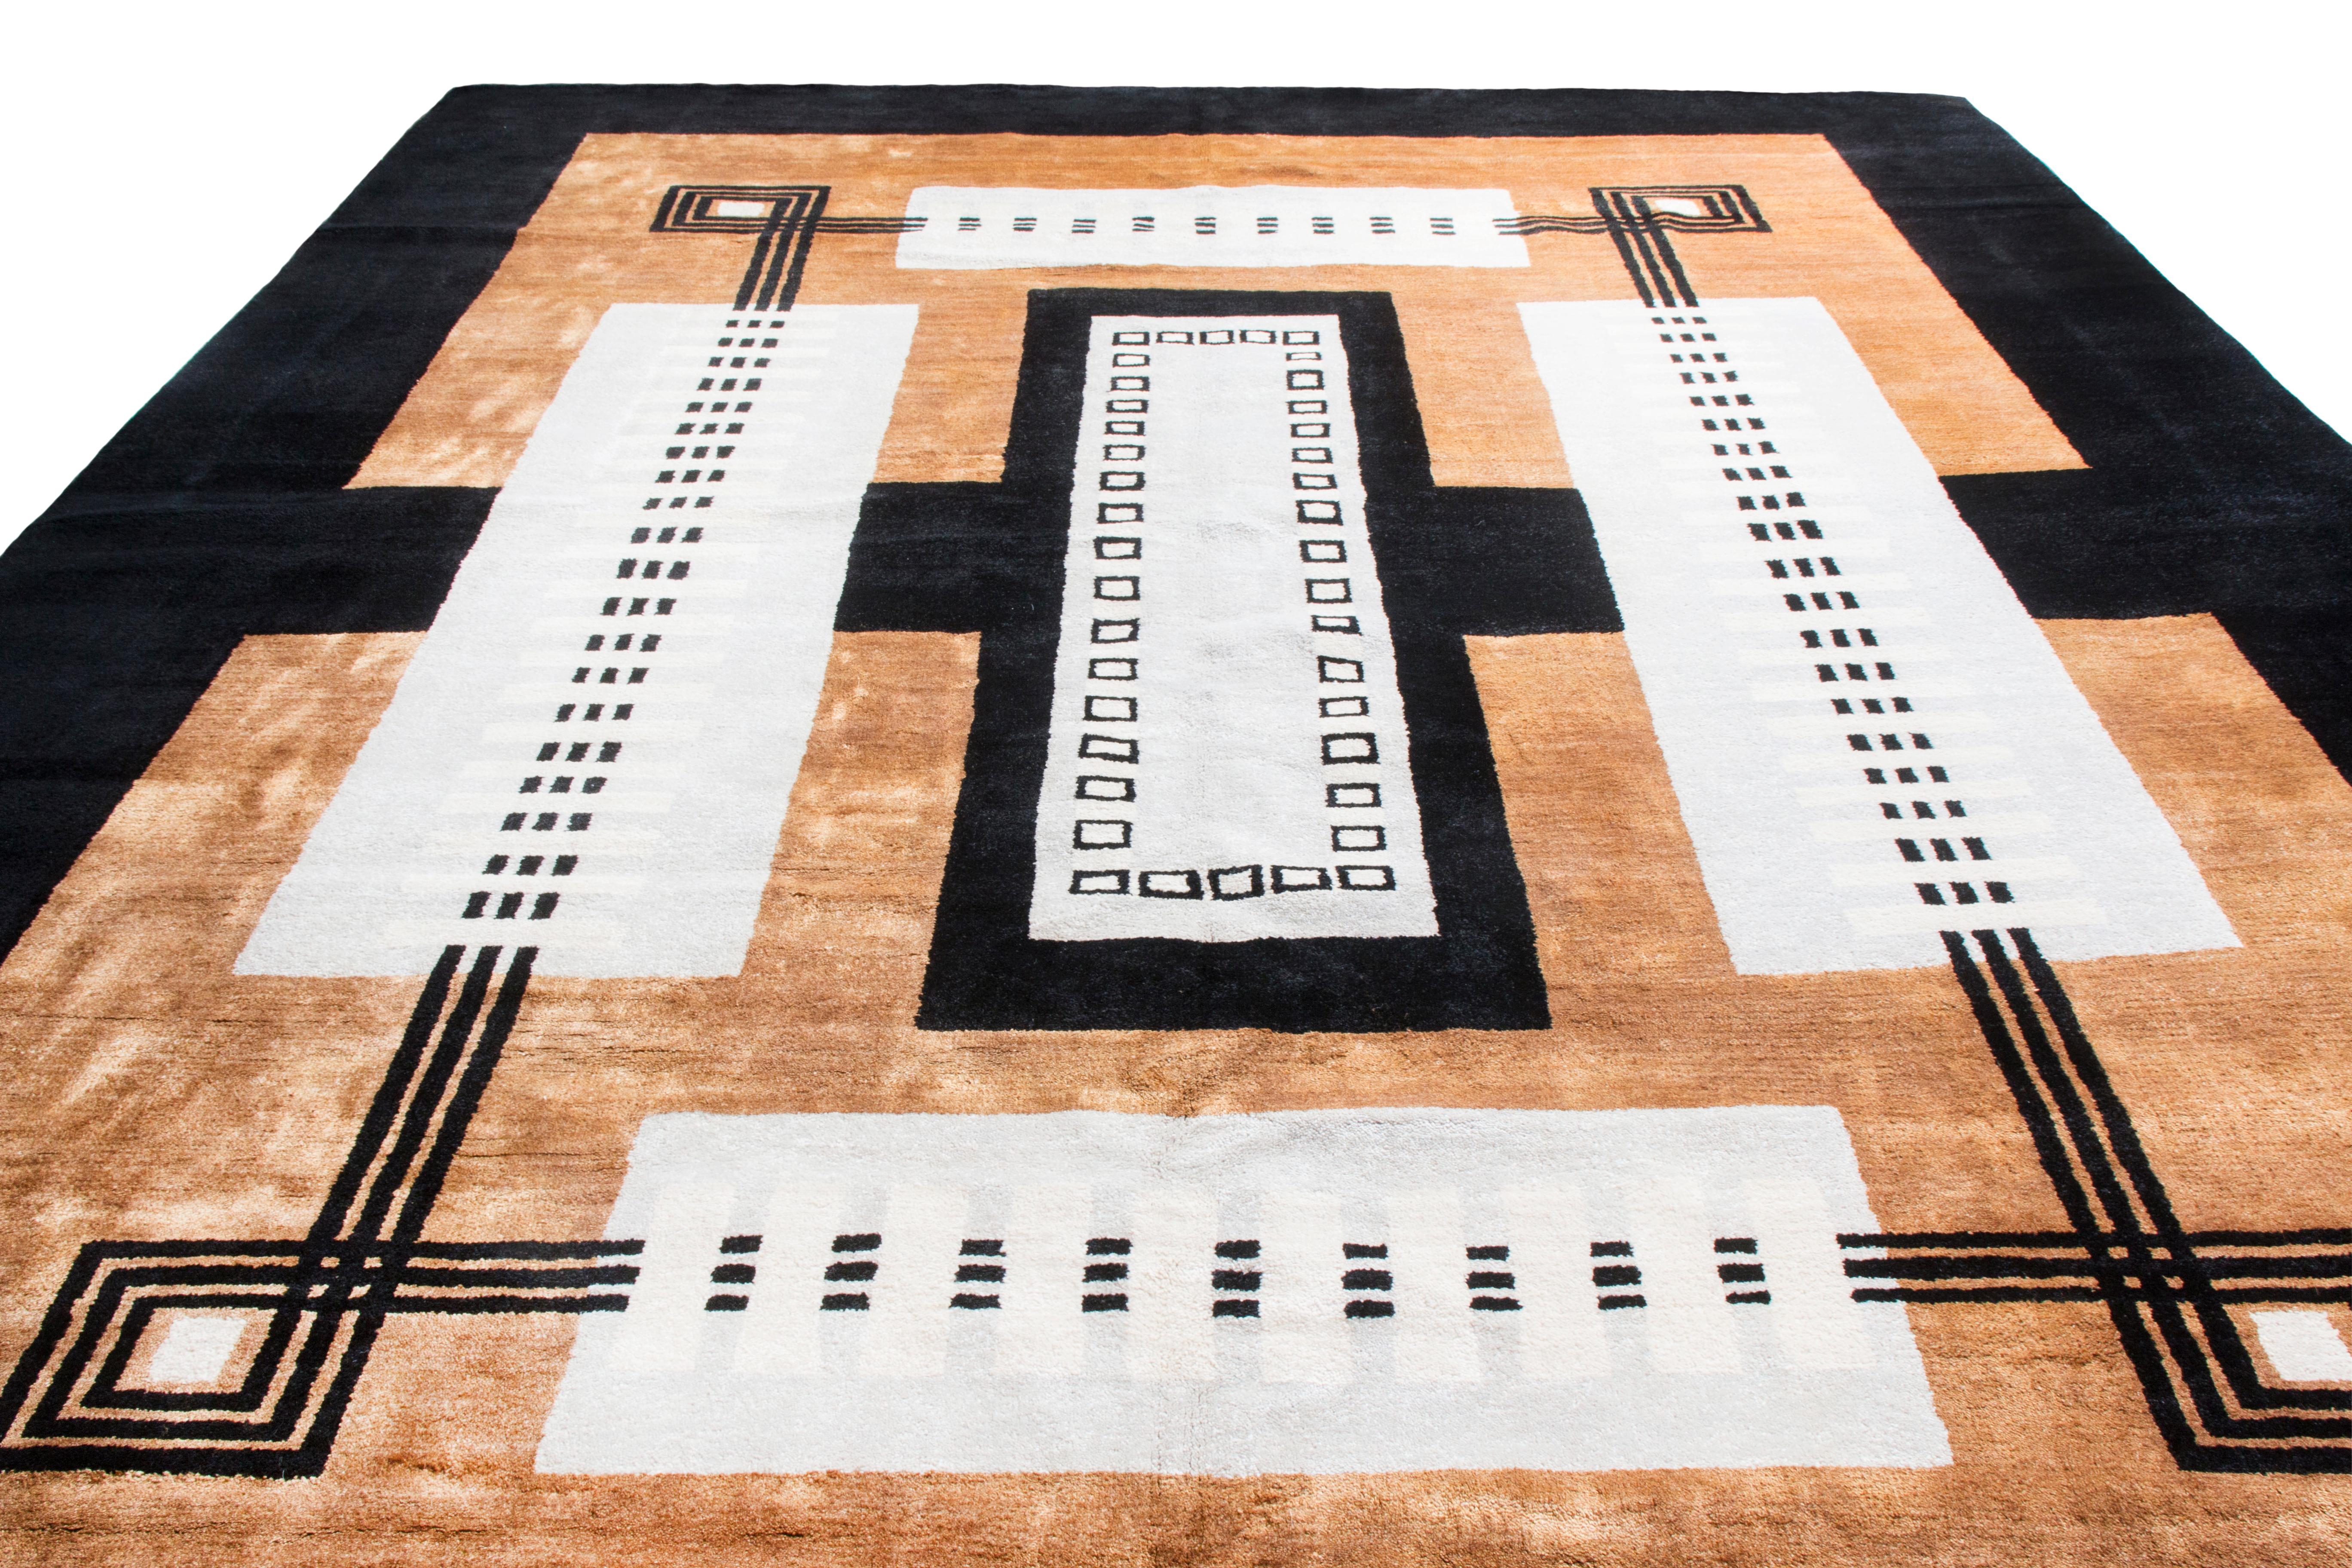 This architectural geometric rug from Rug & Kilim is one of its Mid-Century Modern collection, marrying several influential styles. Originating in India, the geometric field combines elements of architectural and Art Deco designs in vertical and